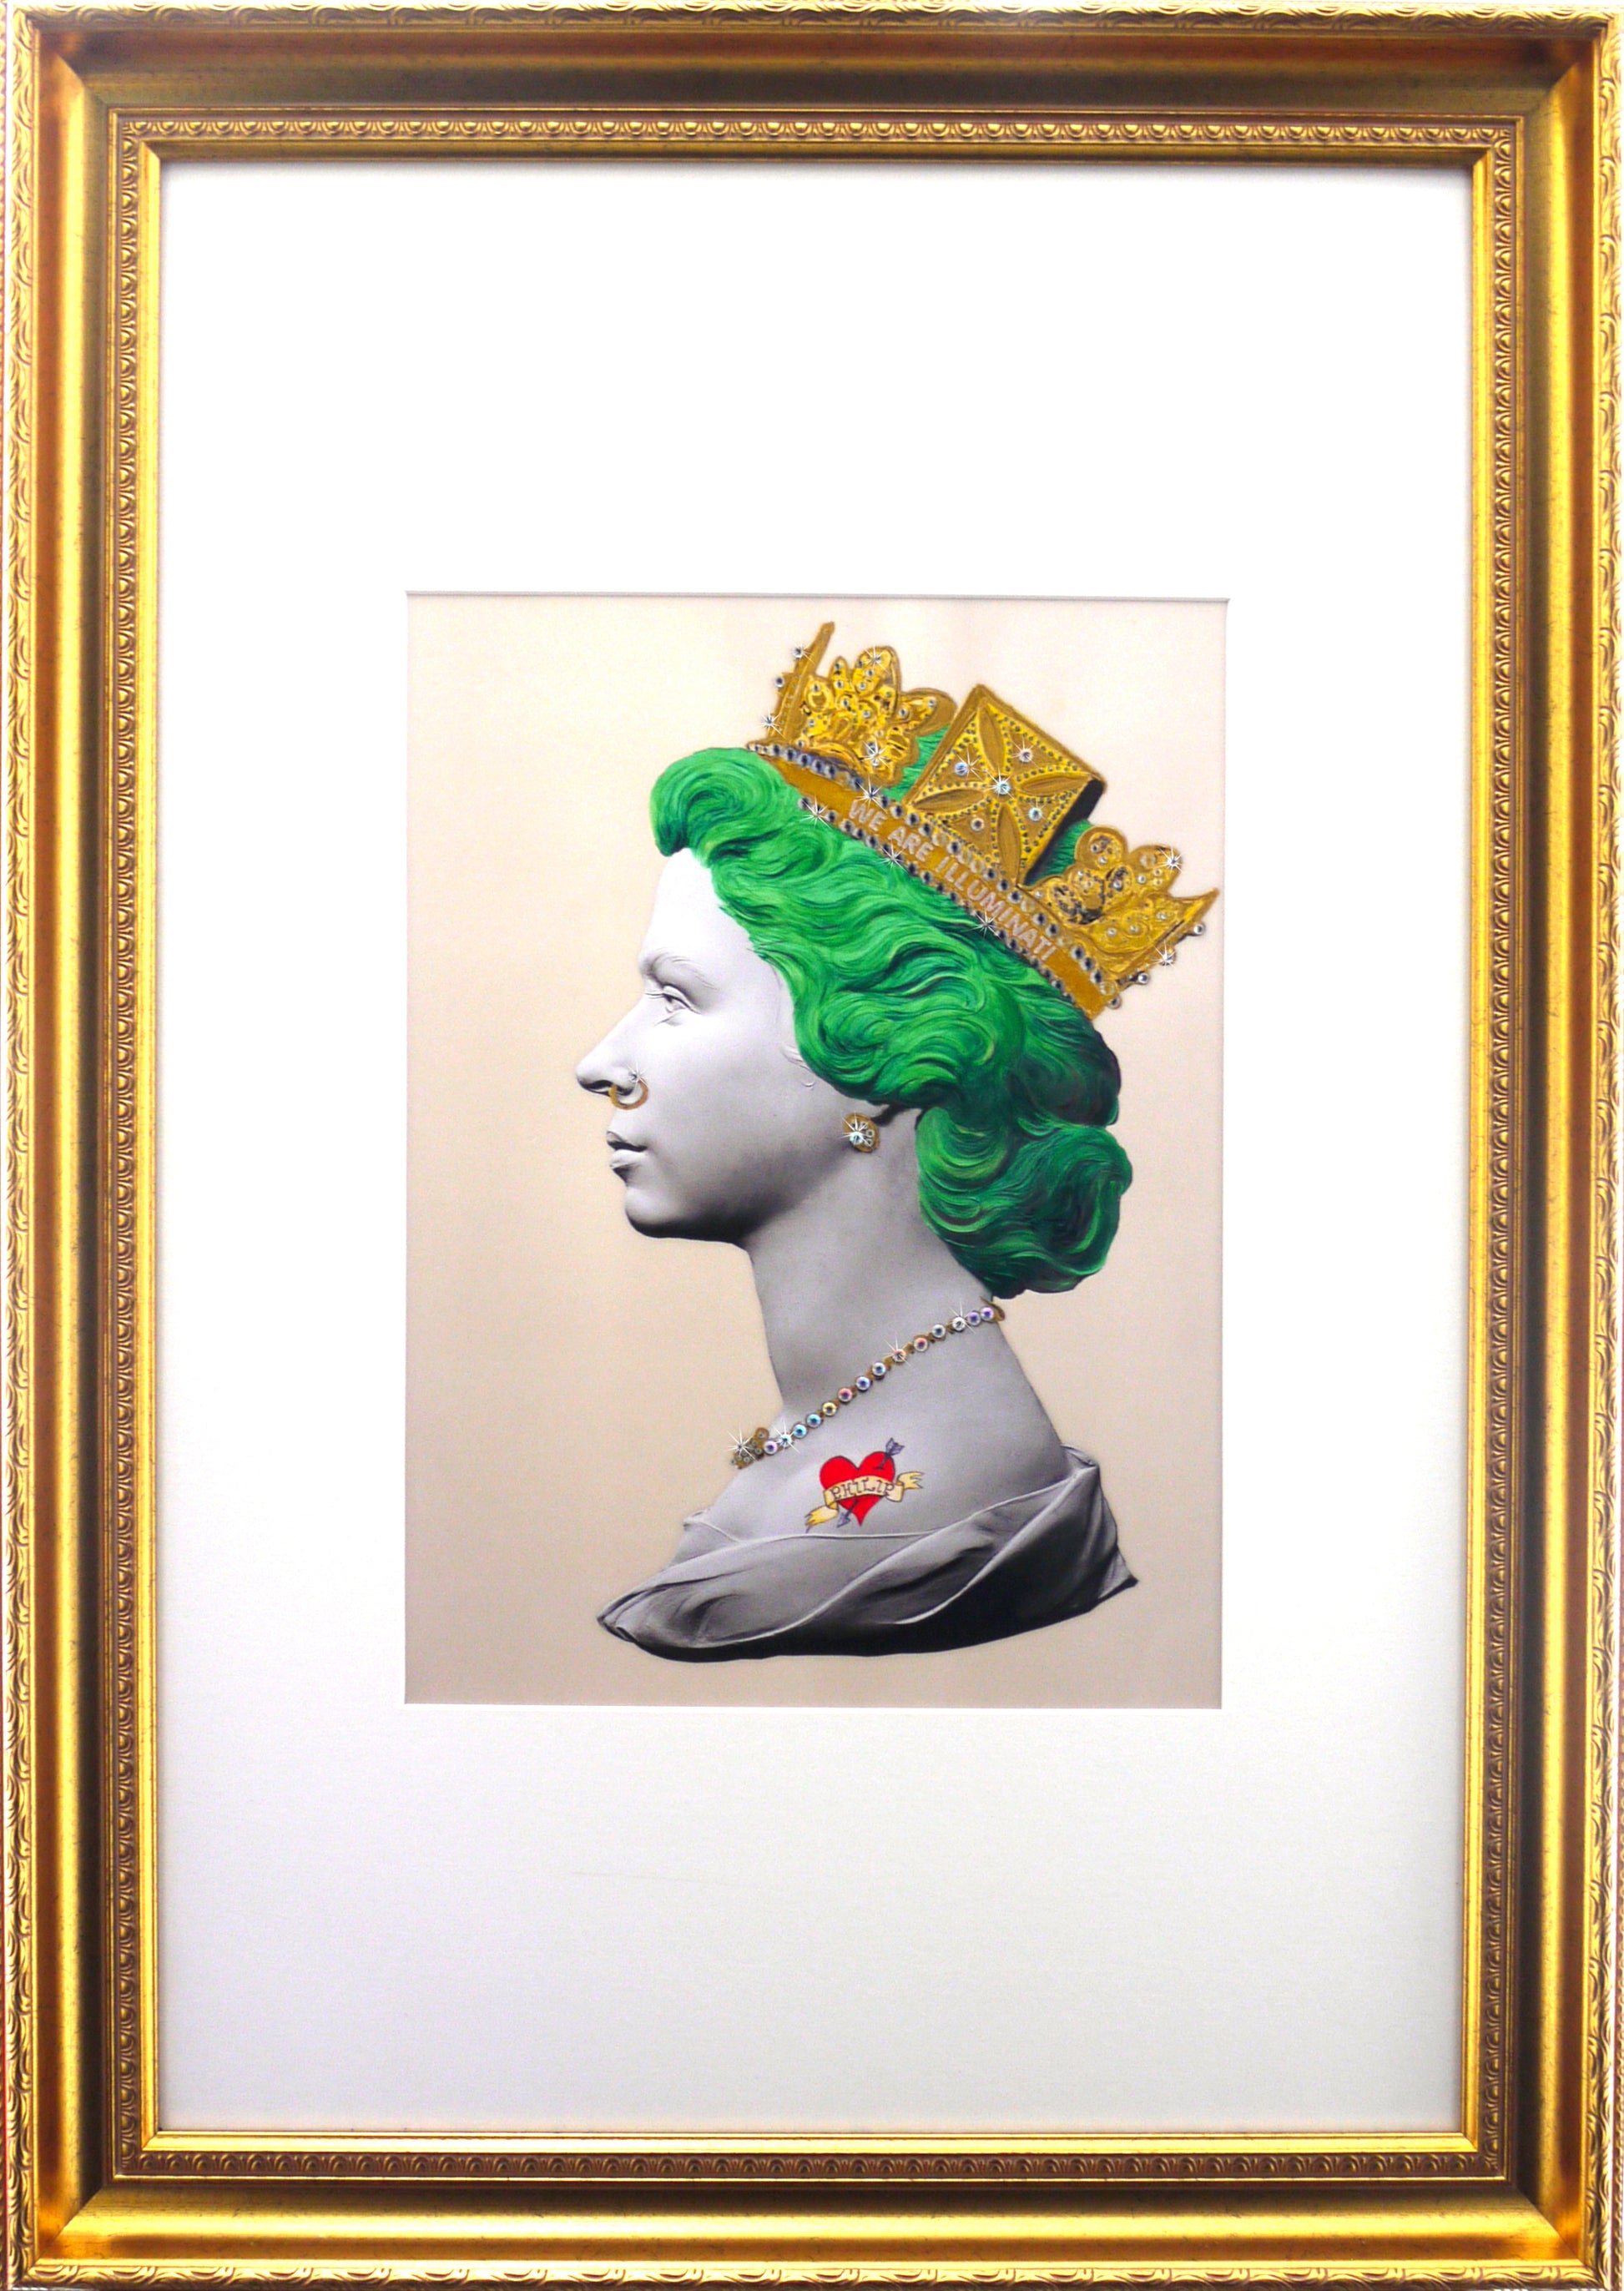 Baby Green Queen Illuminati Neon Signed limited edition Giclée with 24 ct gold leaf and crystal embelishments 87 x 62cmnd crystal embelishments 87 x 62cm